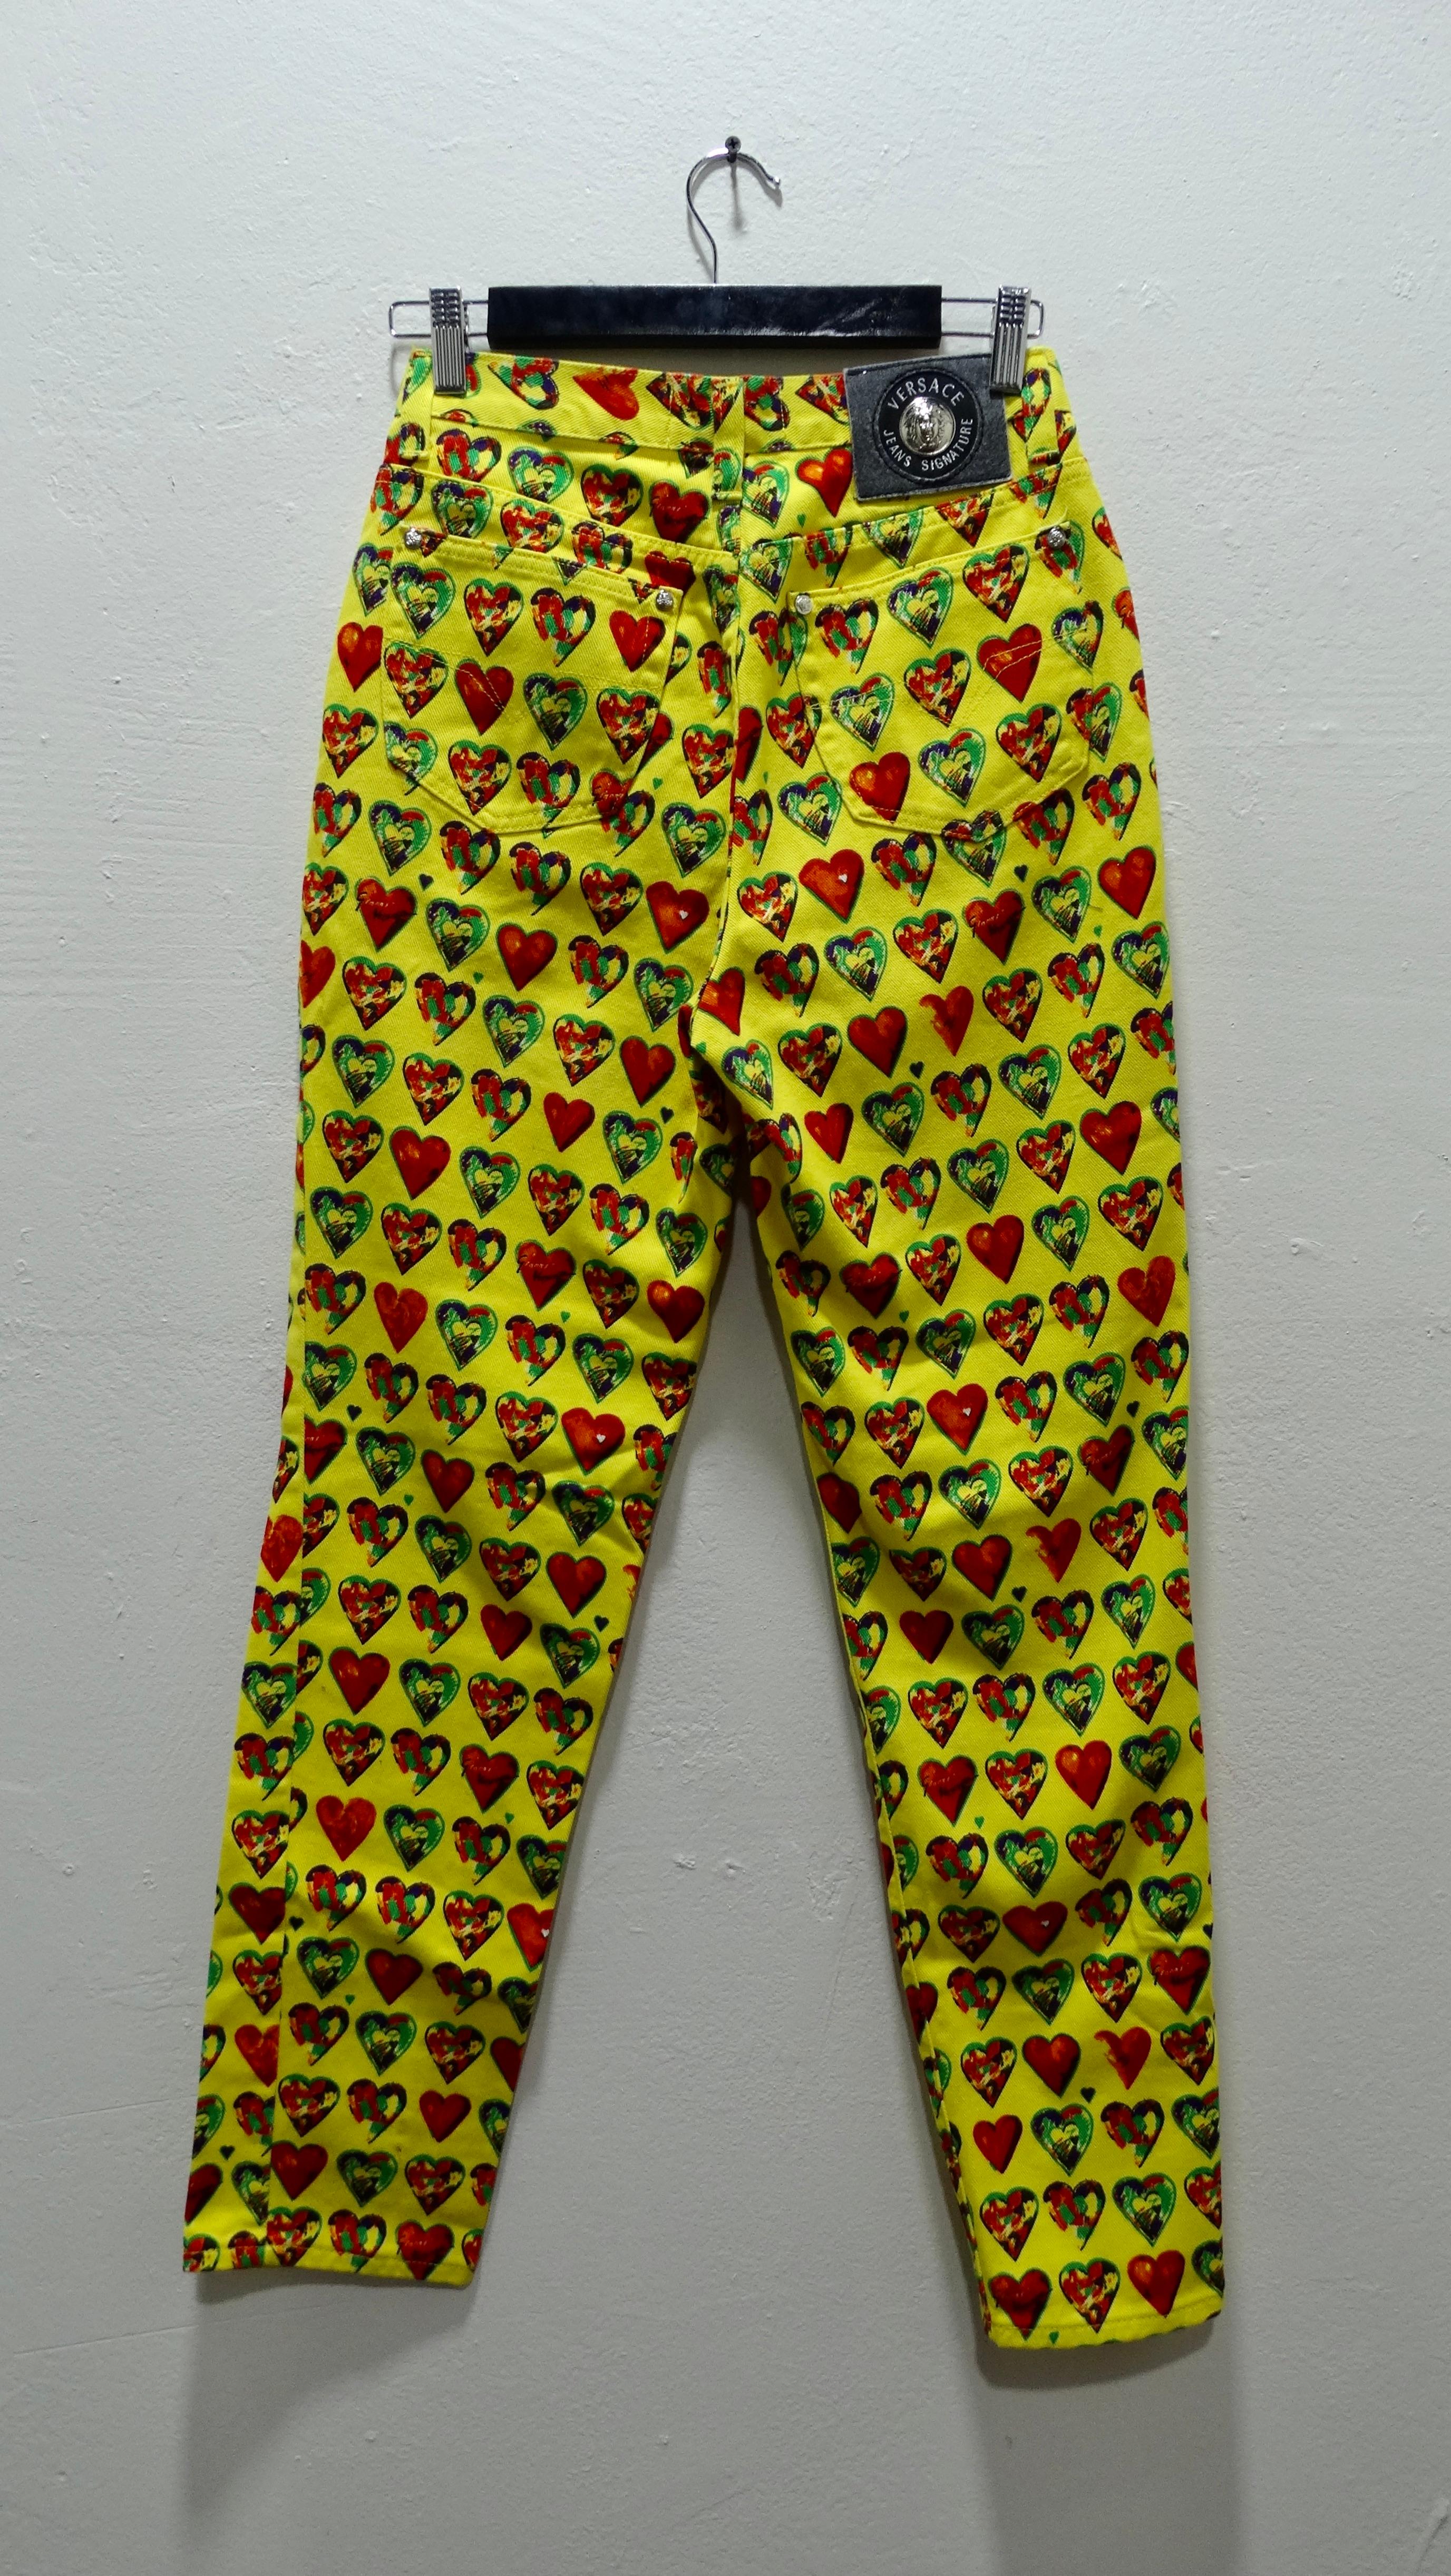 Heart eyes for these funky jeans! From 1997, these bright yellow boyfriend style jeans feature a colorful hearts motif that Gianni commissioned from the artist Jim Dine for his New York residence. This print became iconic and was featured again on